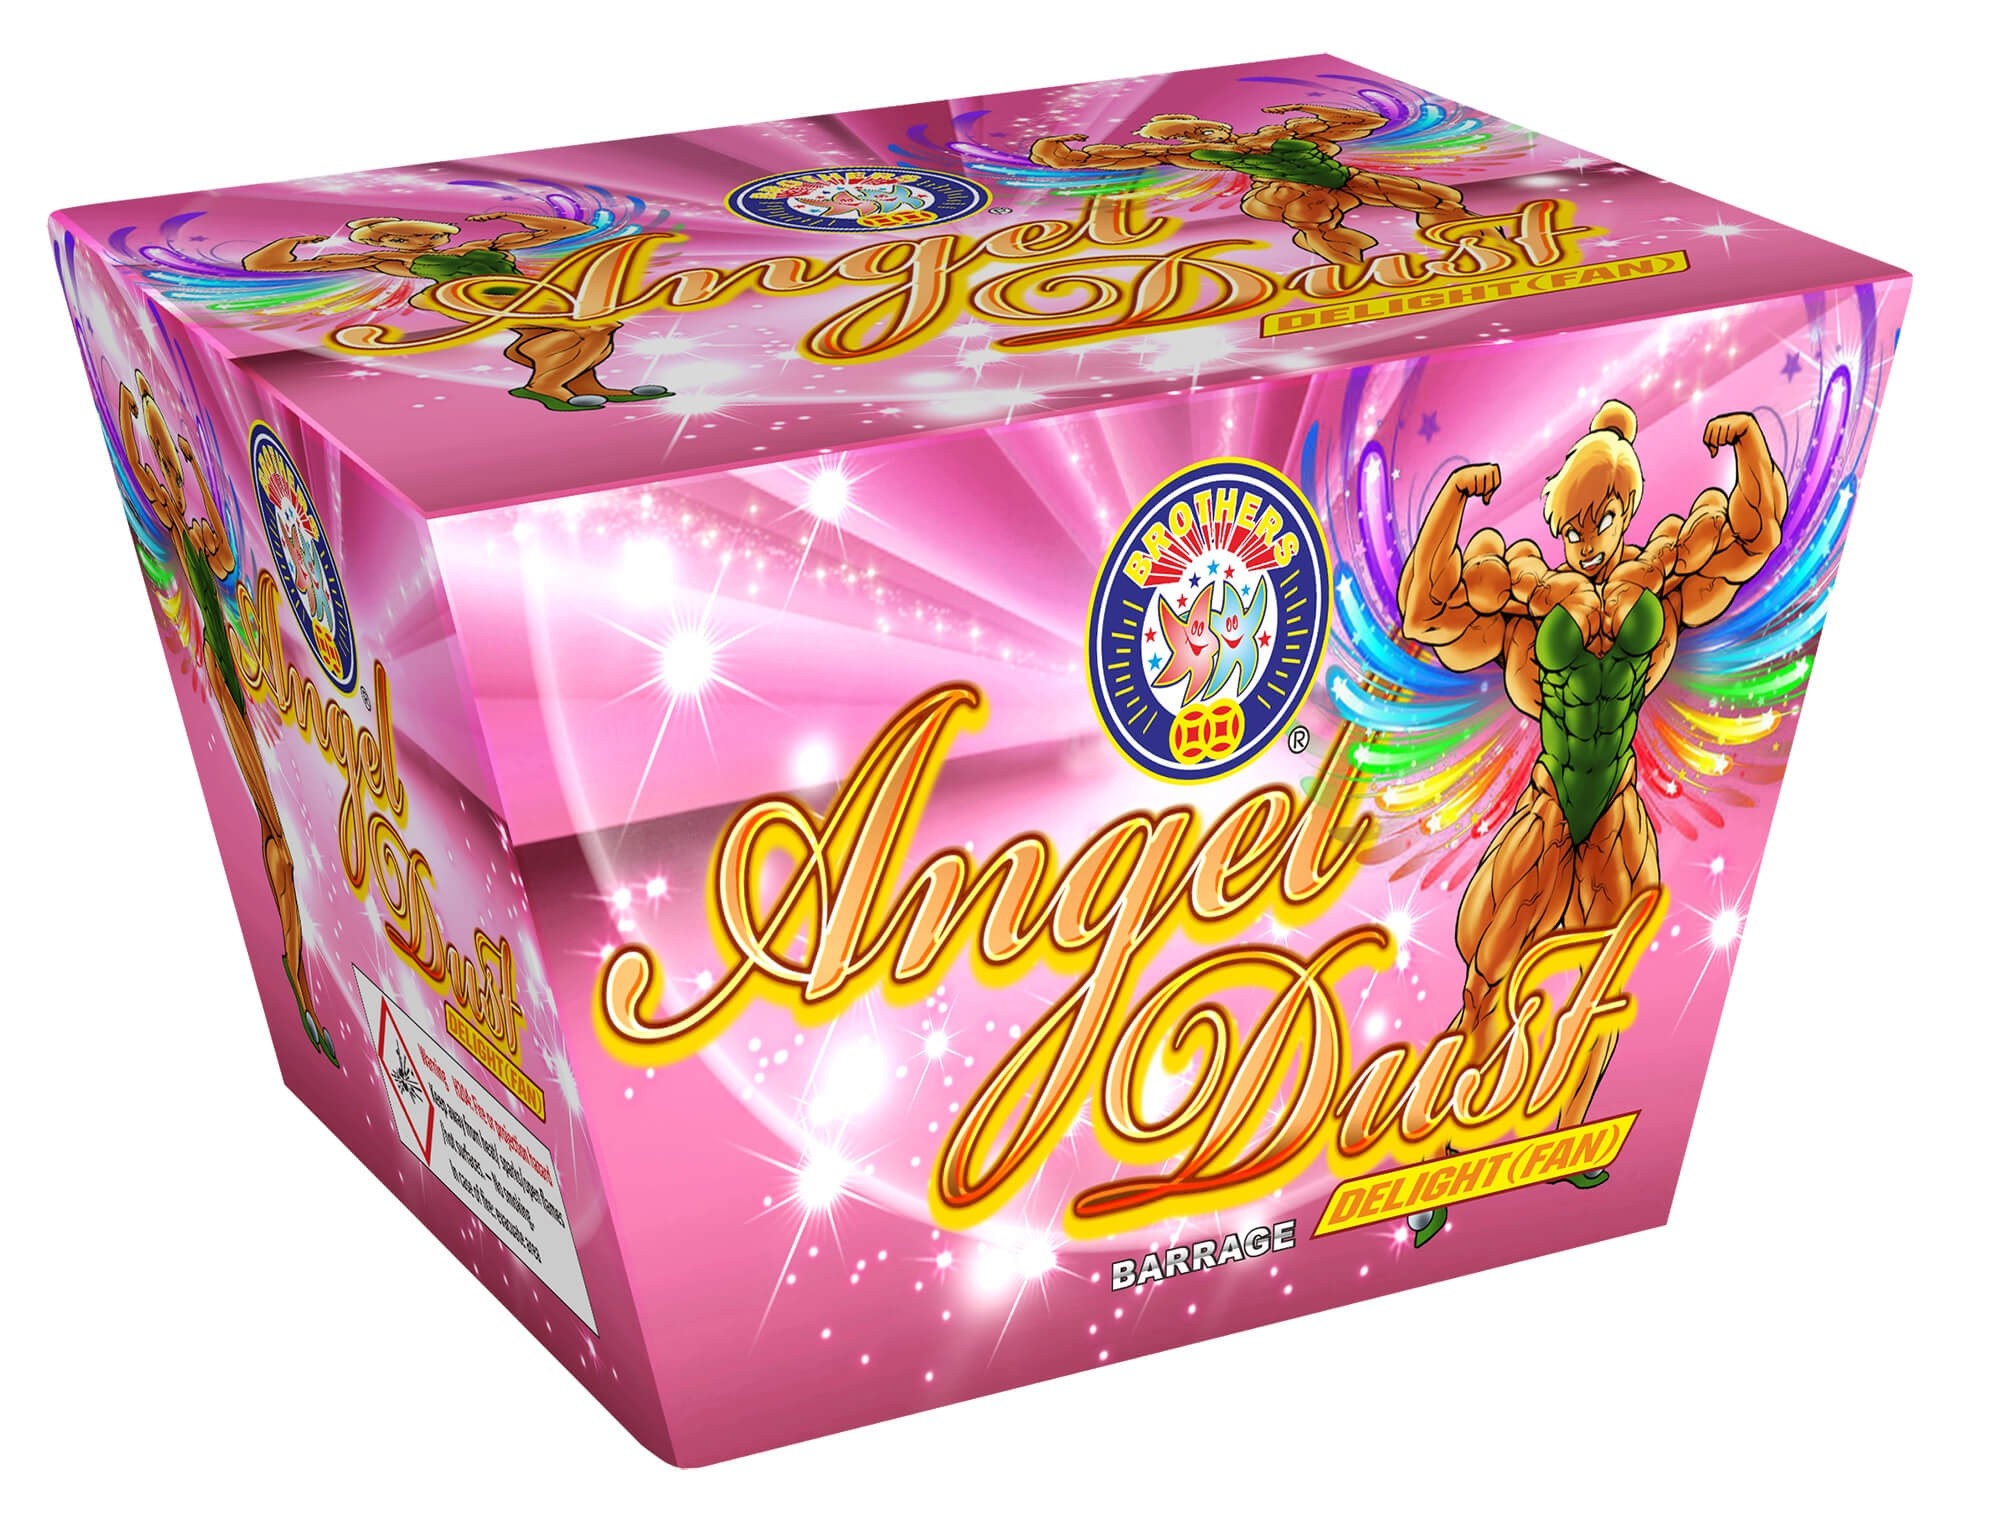 Angel Dust Delight by Brothers Pyrotechnics available at Fireworks Kingdom